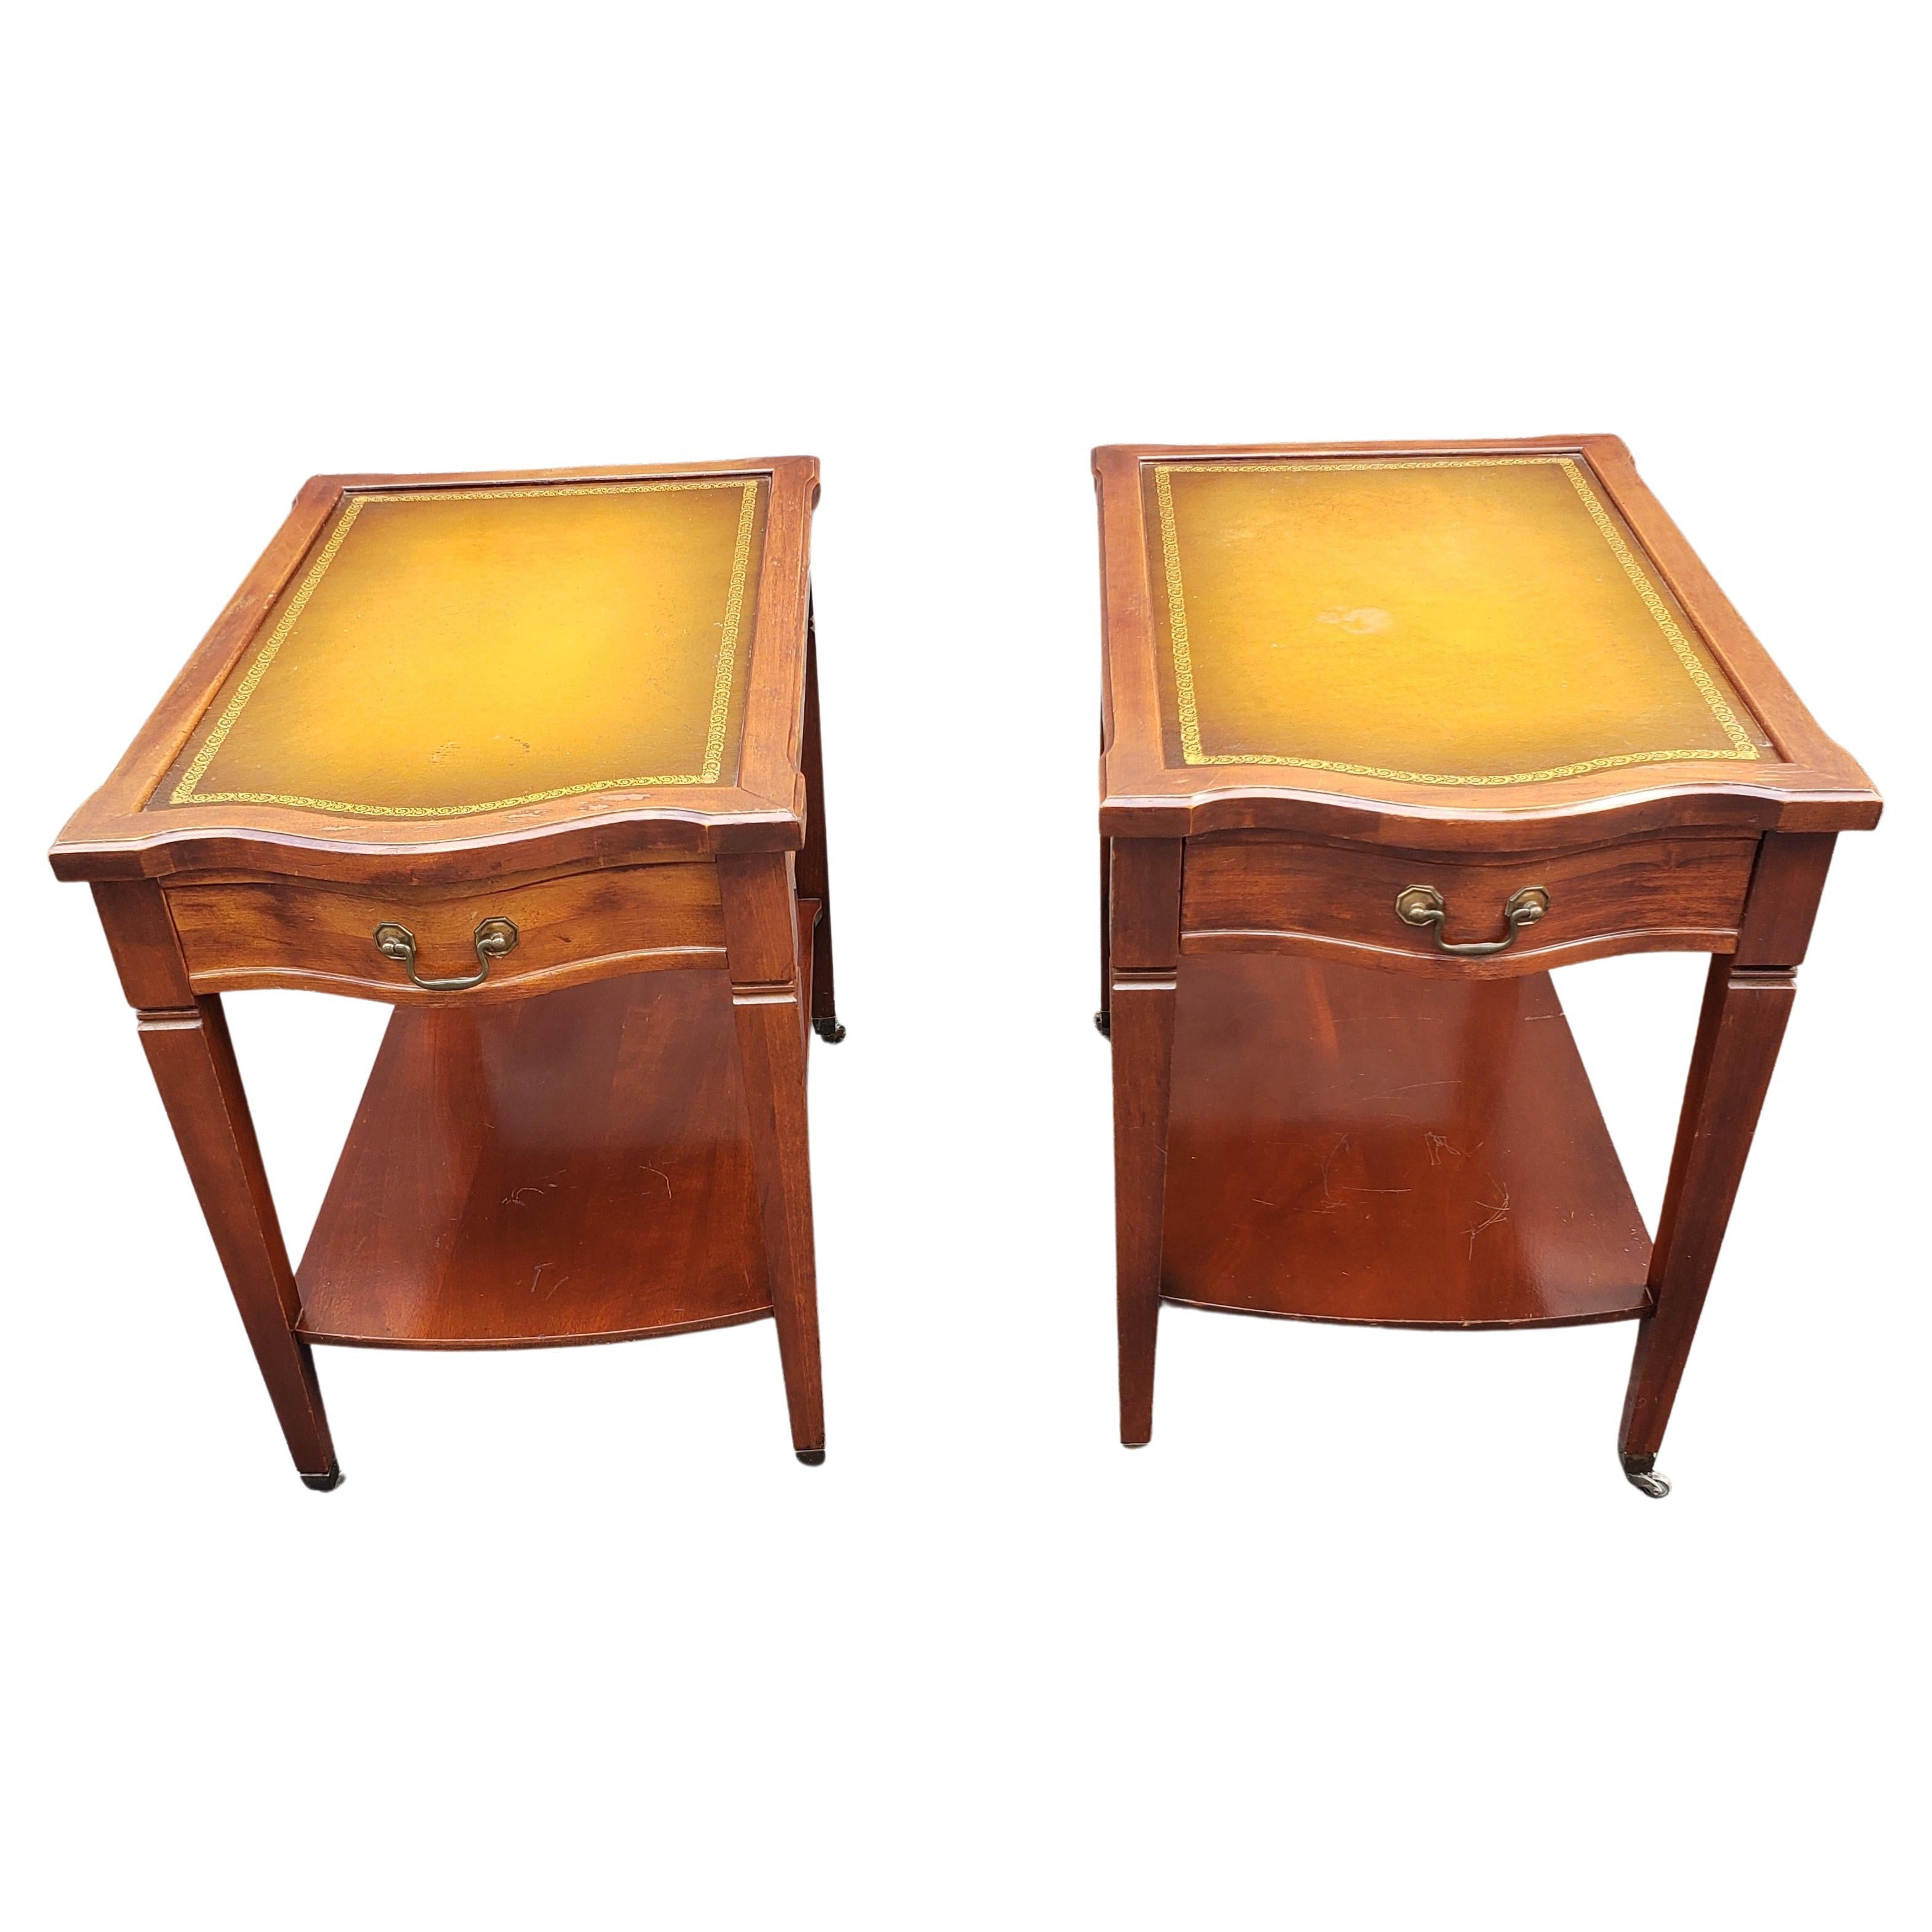 1940s Mersman Two Tier Mahogany Tooled Leather Stenciled Top Side Tables. Good vintage condition.